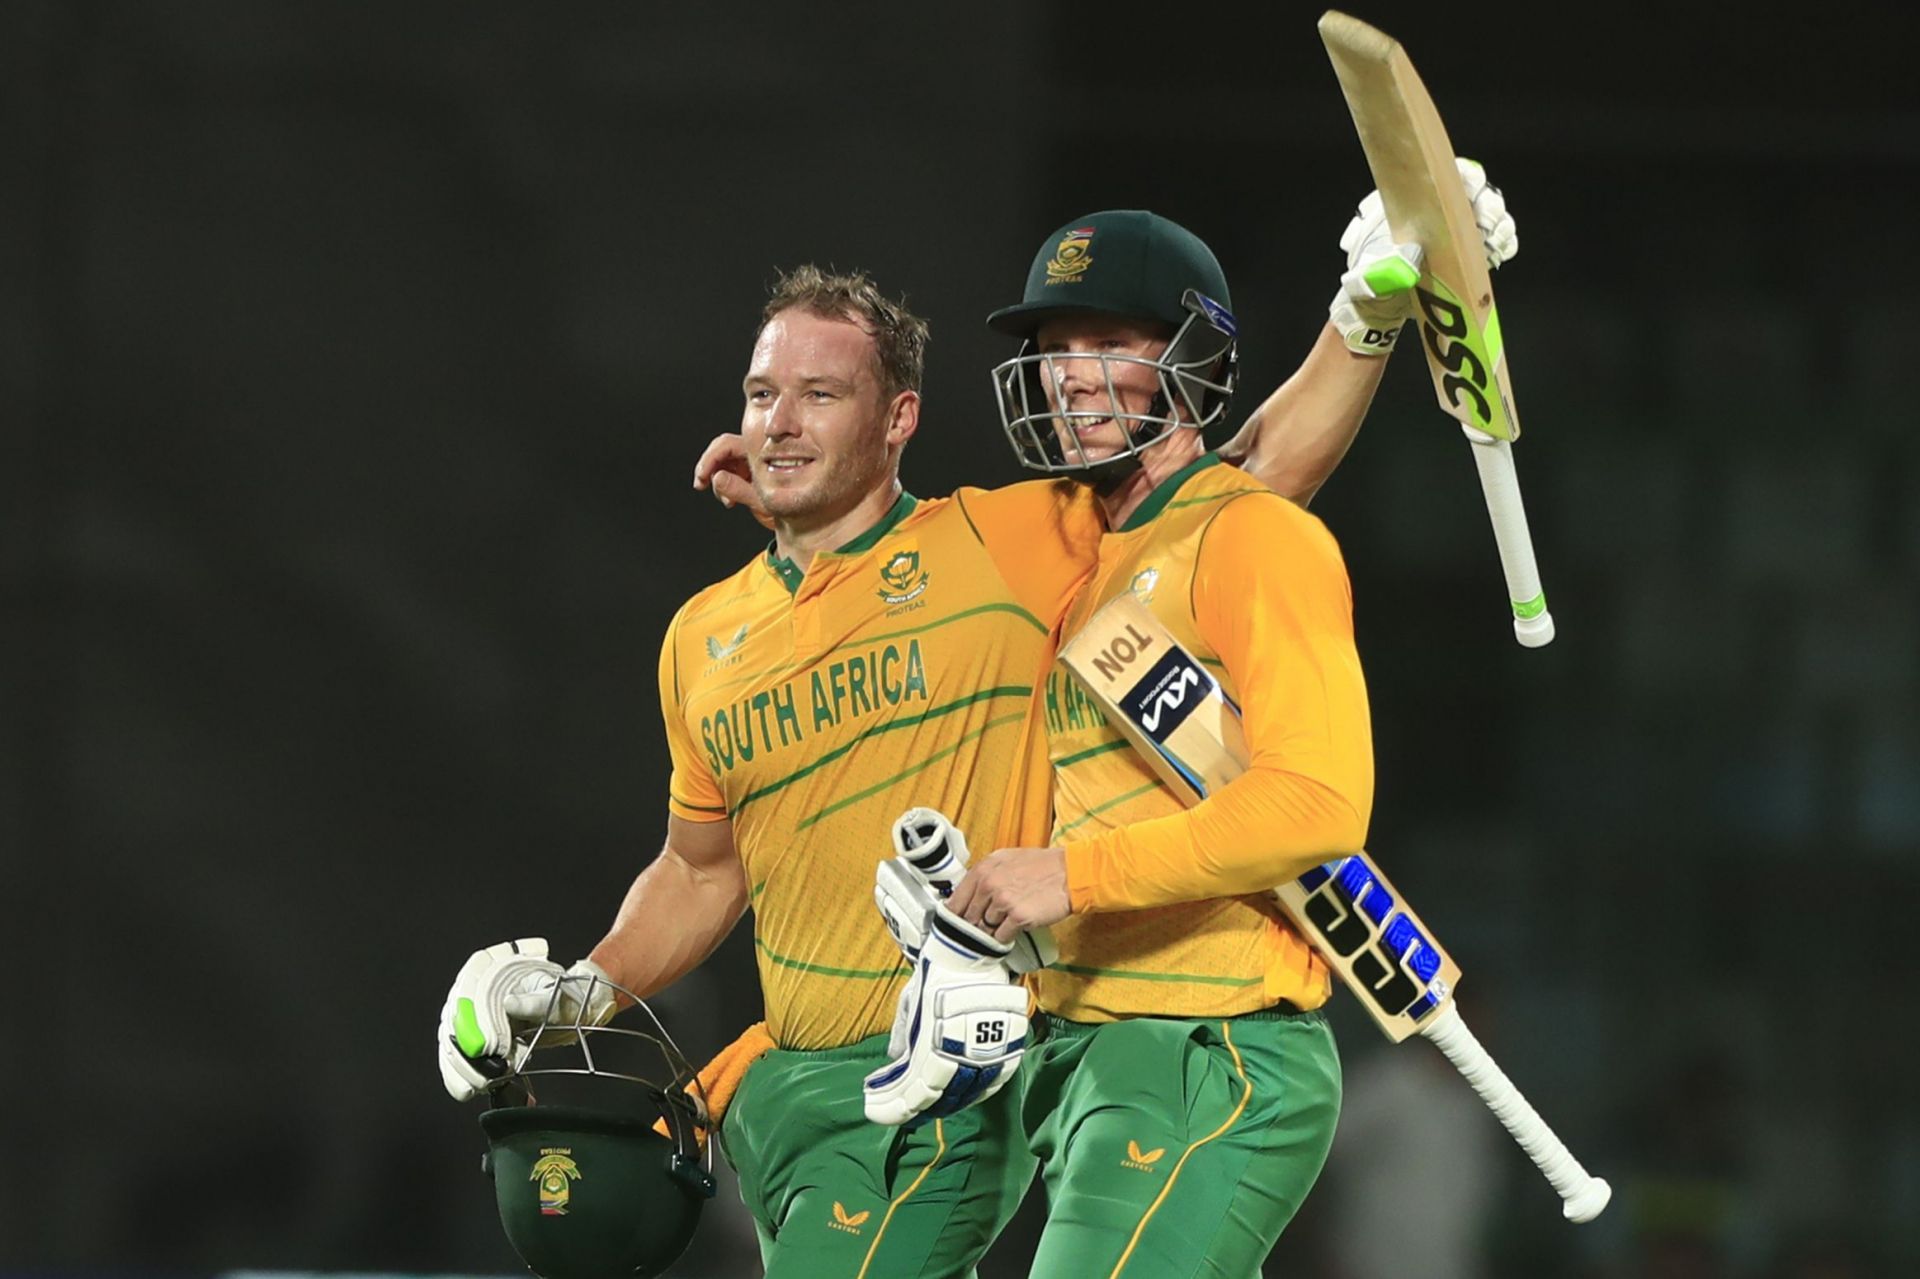 South Africa have been superb in the ongoing T20I series against India